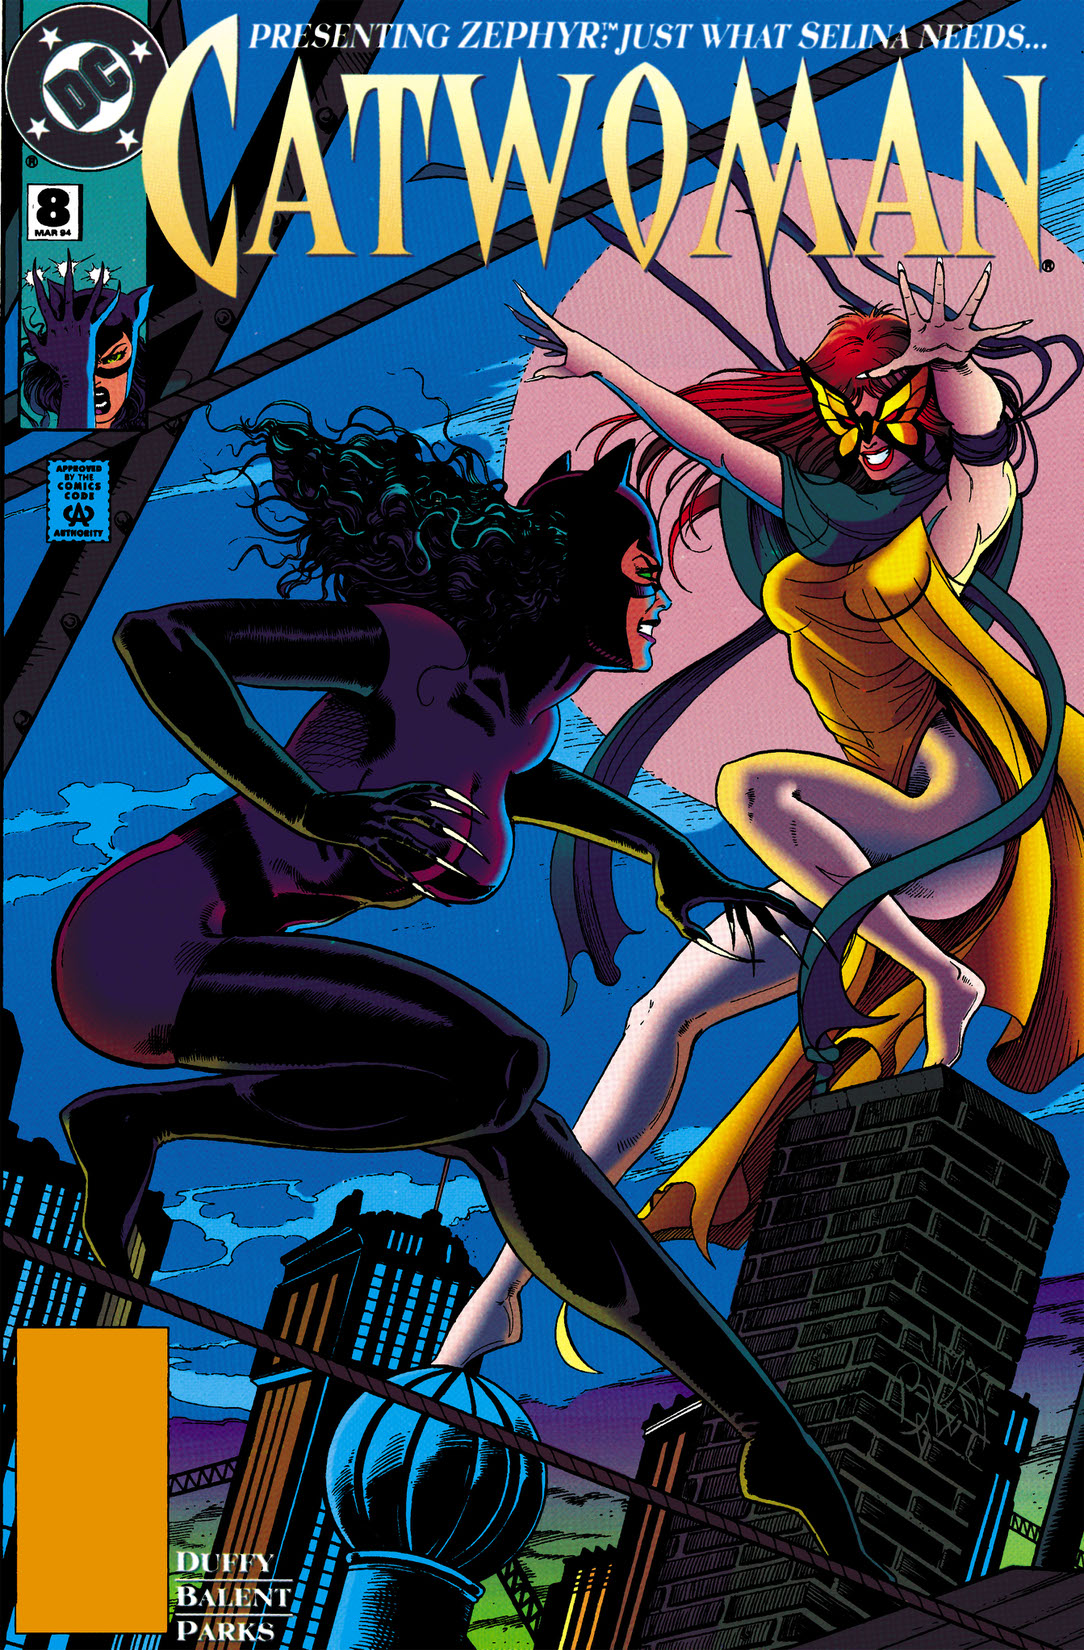 Catwoman (1993-) #8 preview images